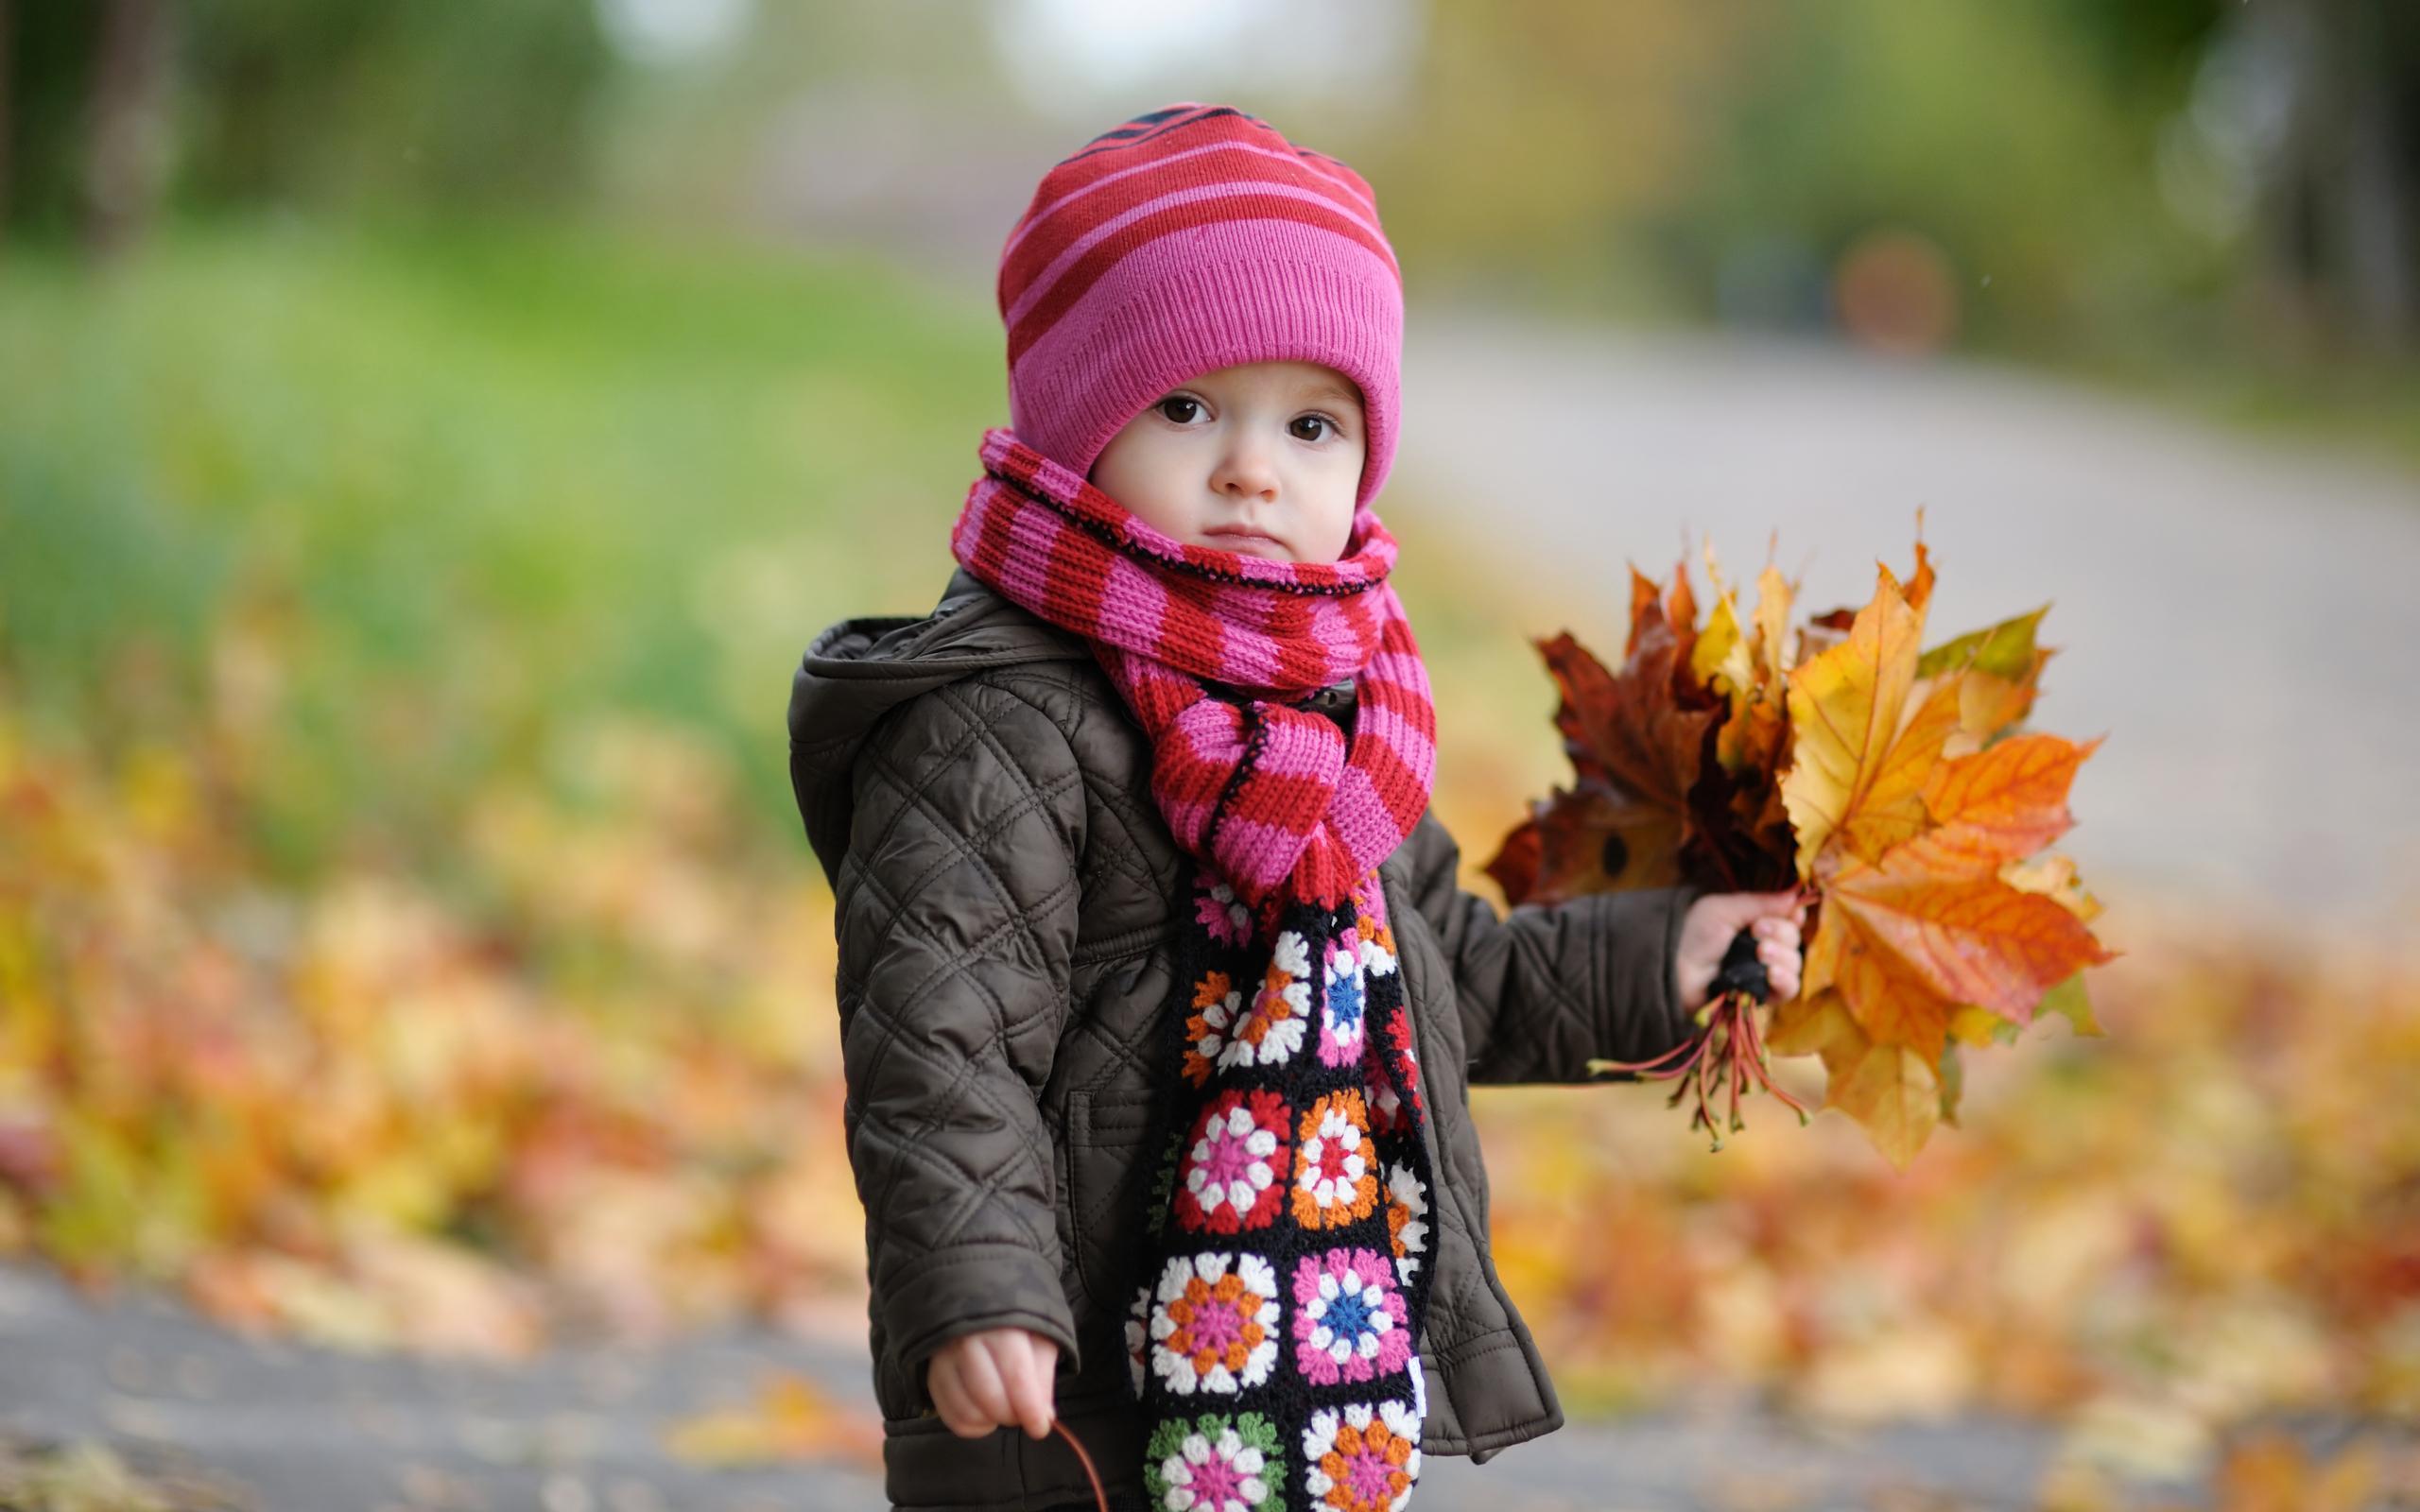 Cute Baby Girl Autumn Wallpaper and Free